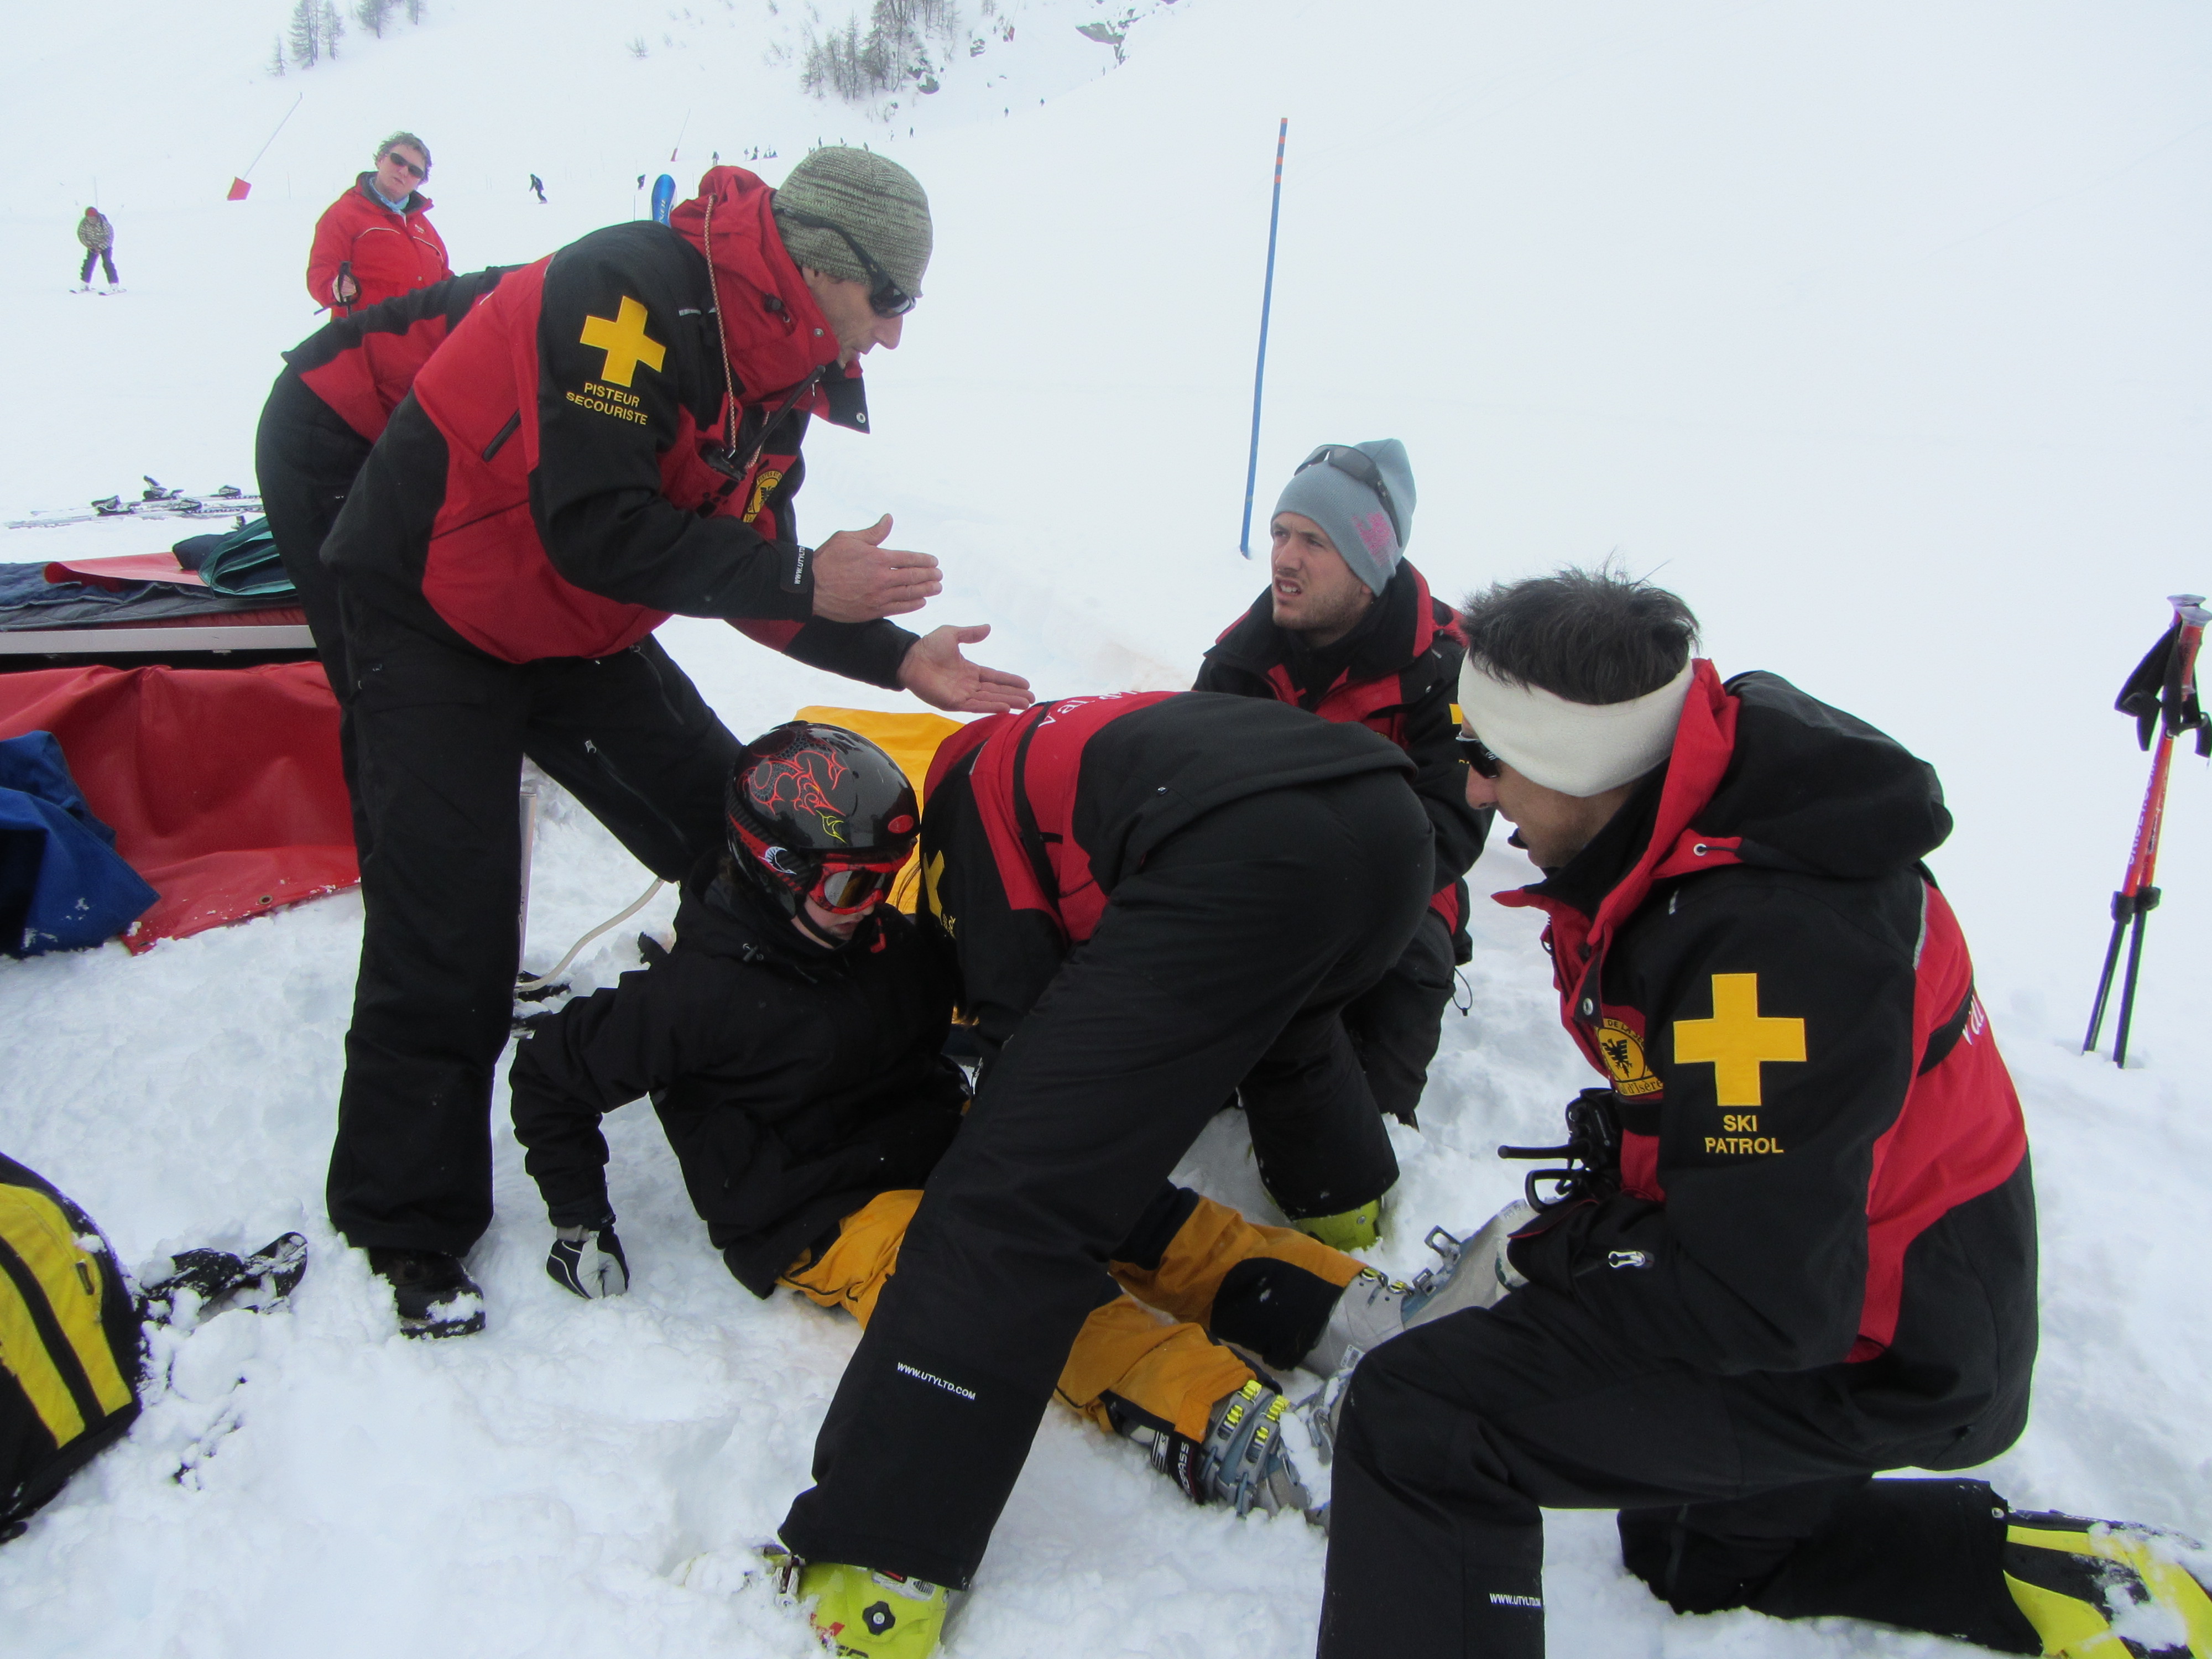 How to avoid knee injury while skiing